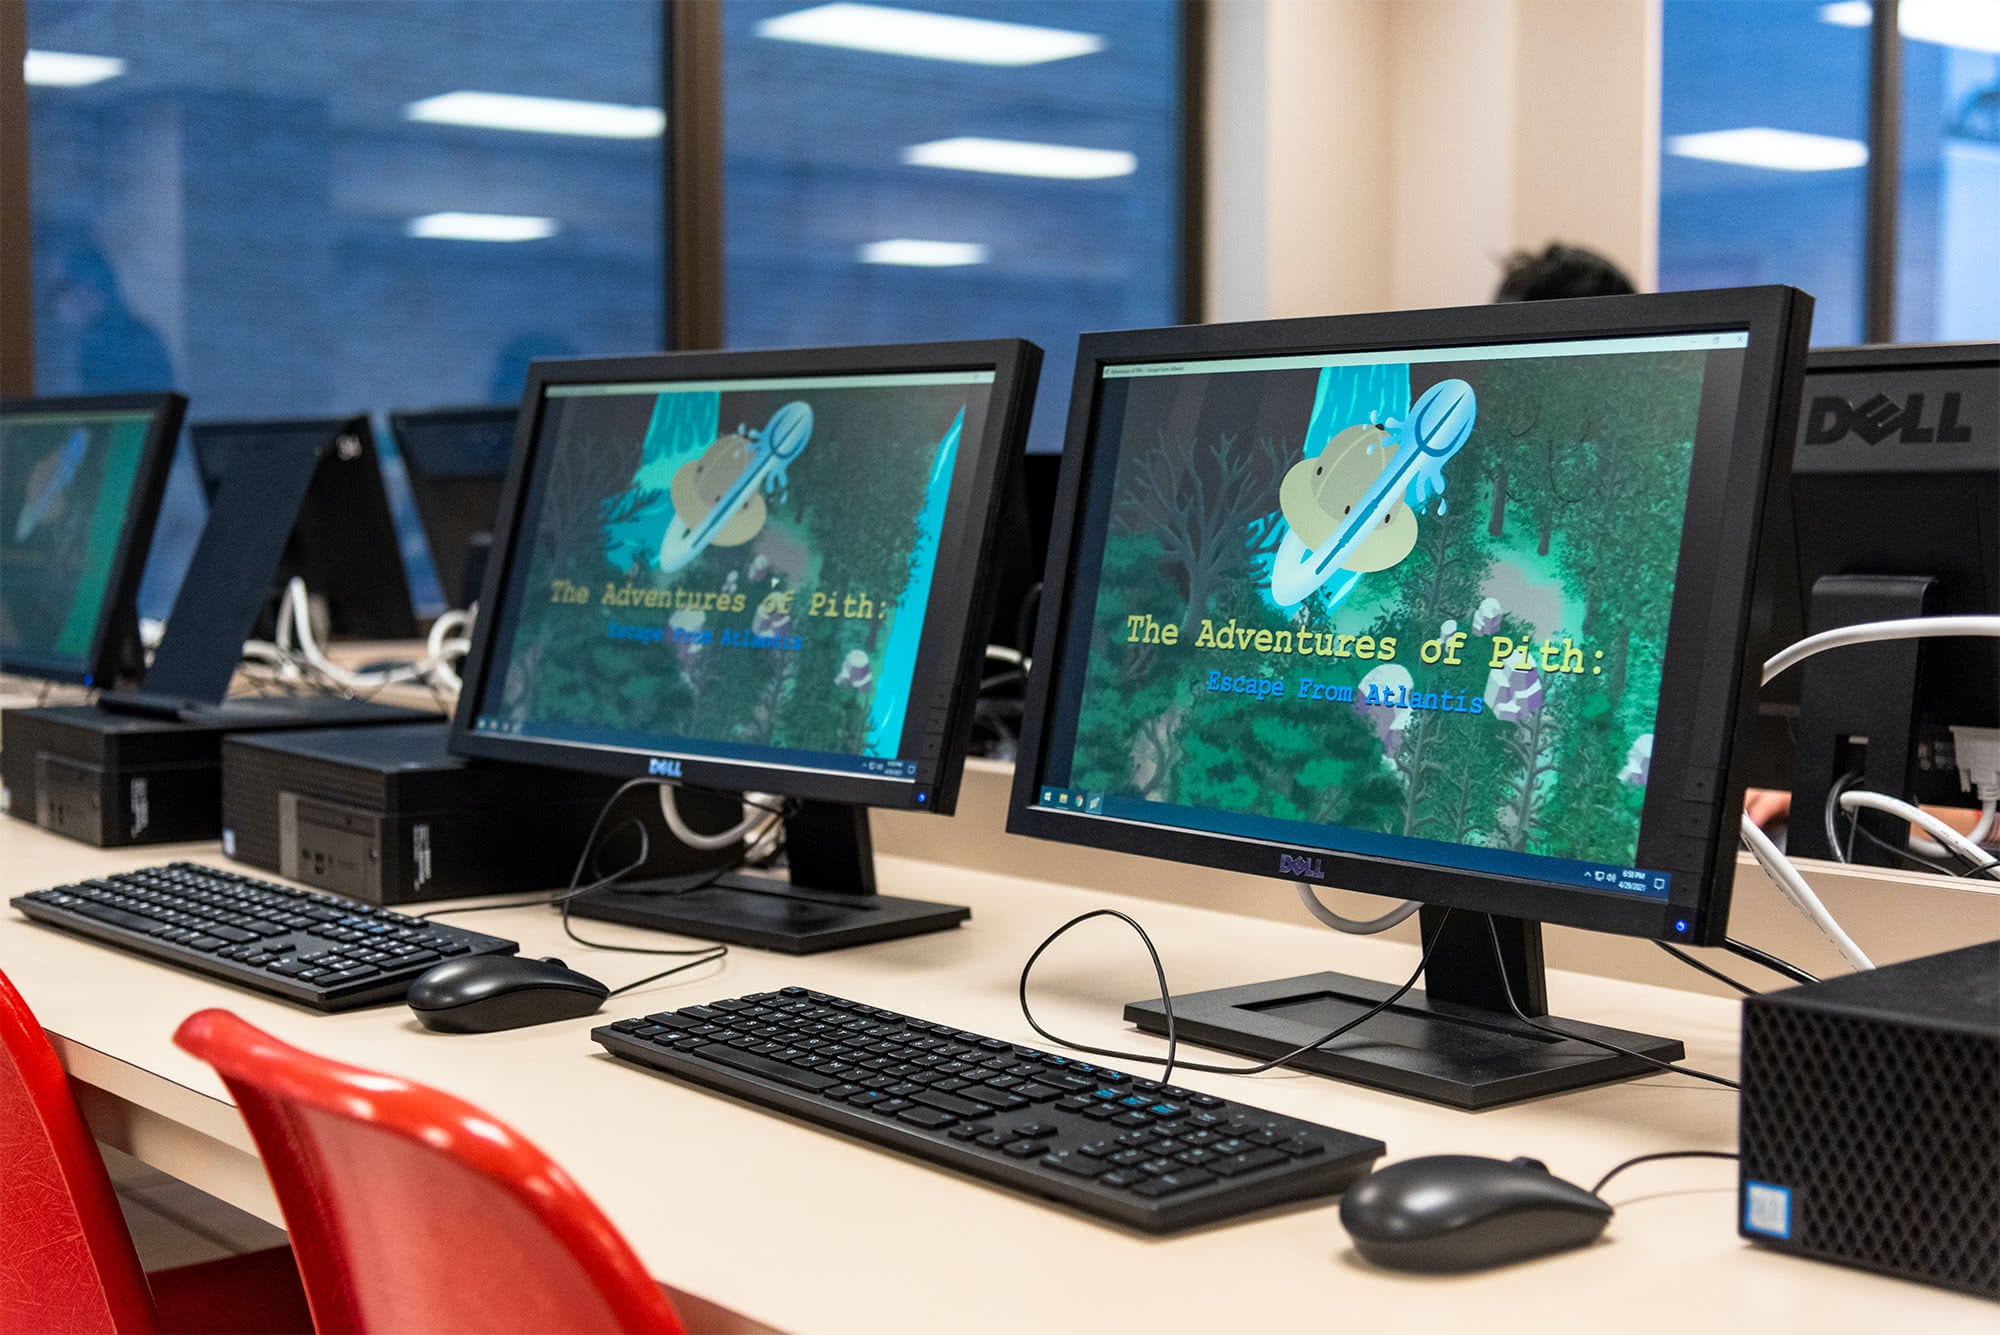 Two computer screens showing a student-created game at the Software Expo.